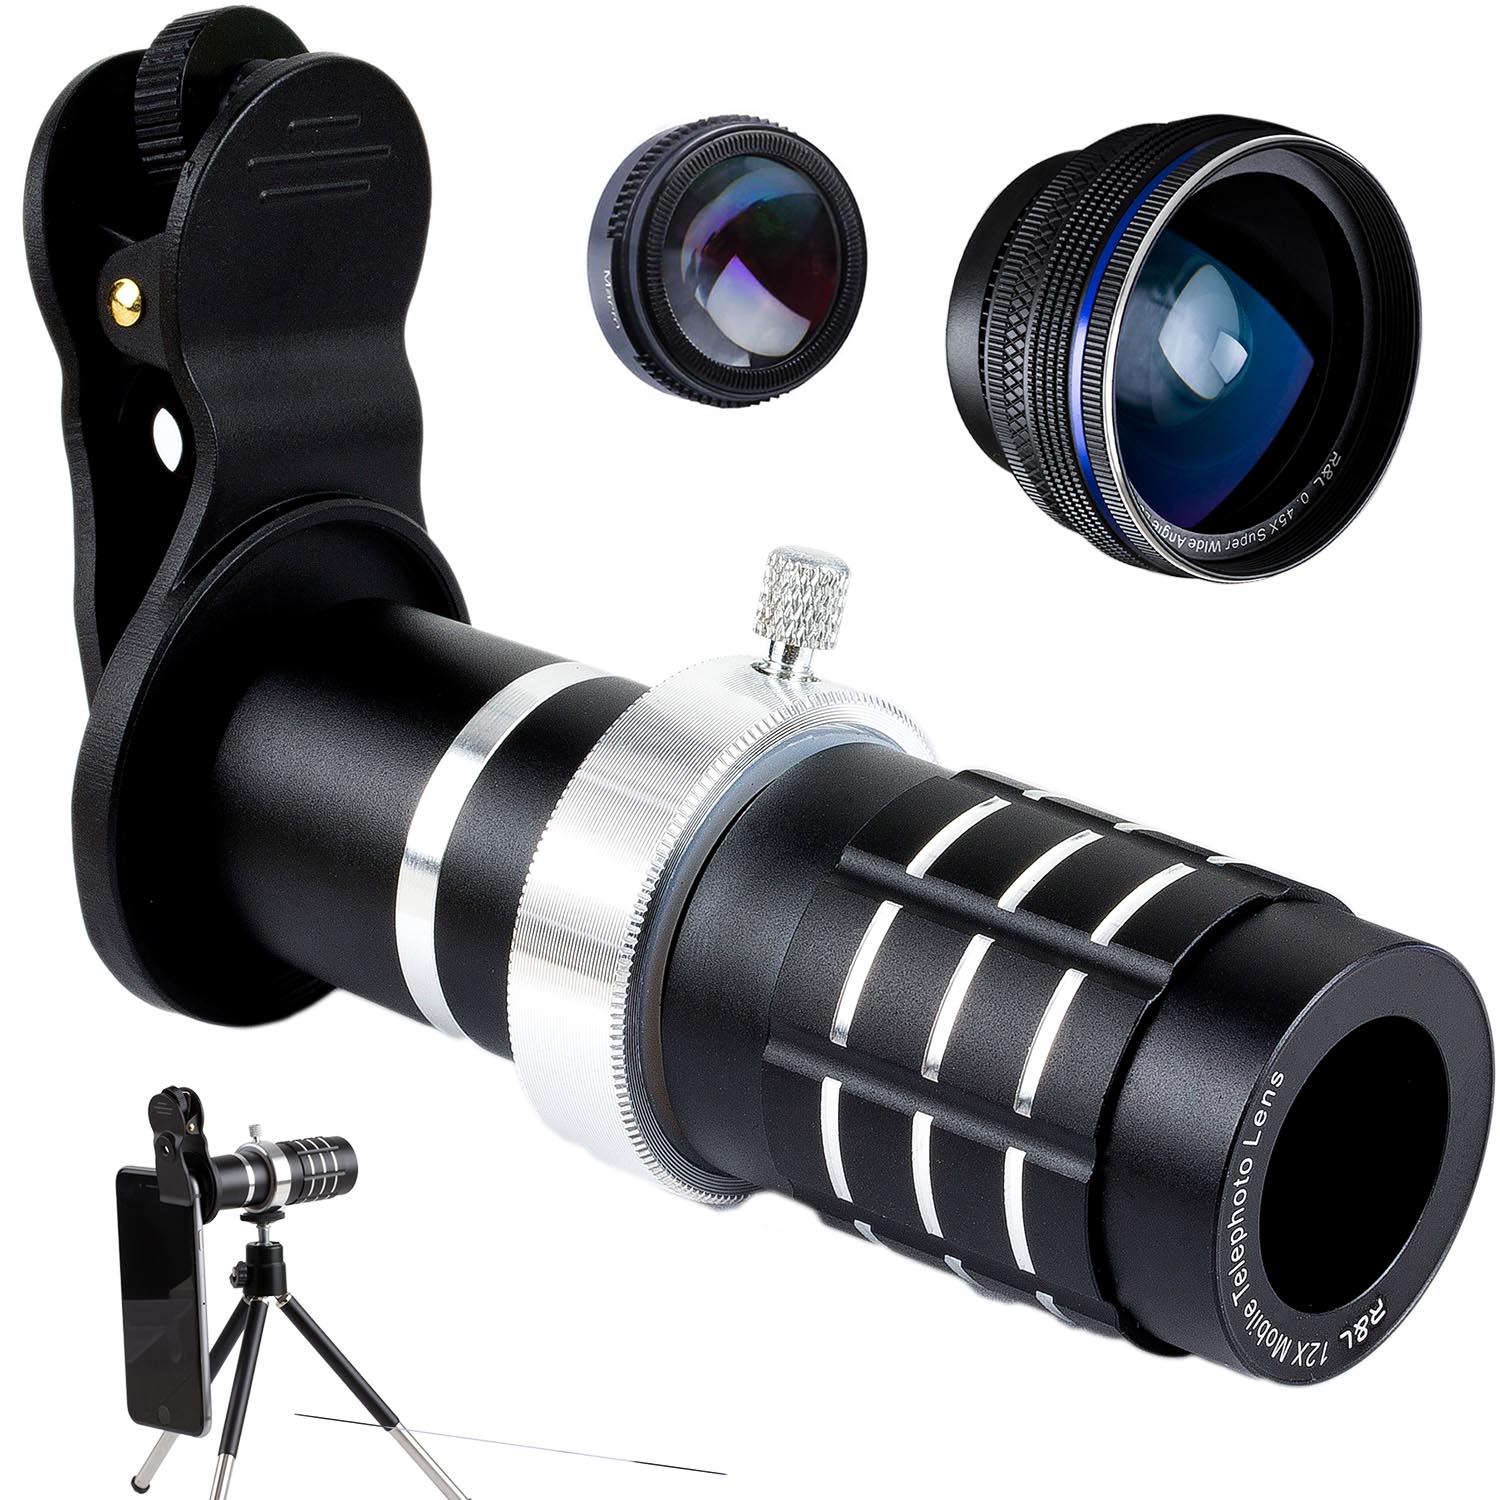 R&L Telephoto Lens for Smartphone, Mobile Camera Kit with 12X Telephoto, Wide Angle and Macro Lenses 3 in 1 - image 1 of 7